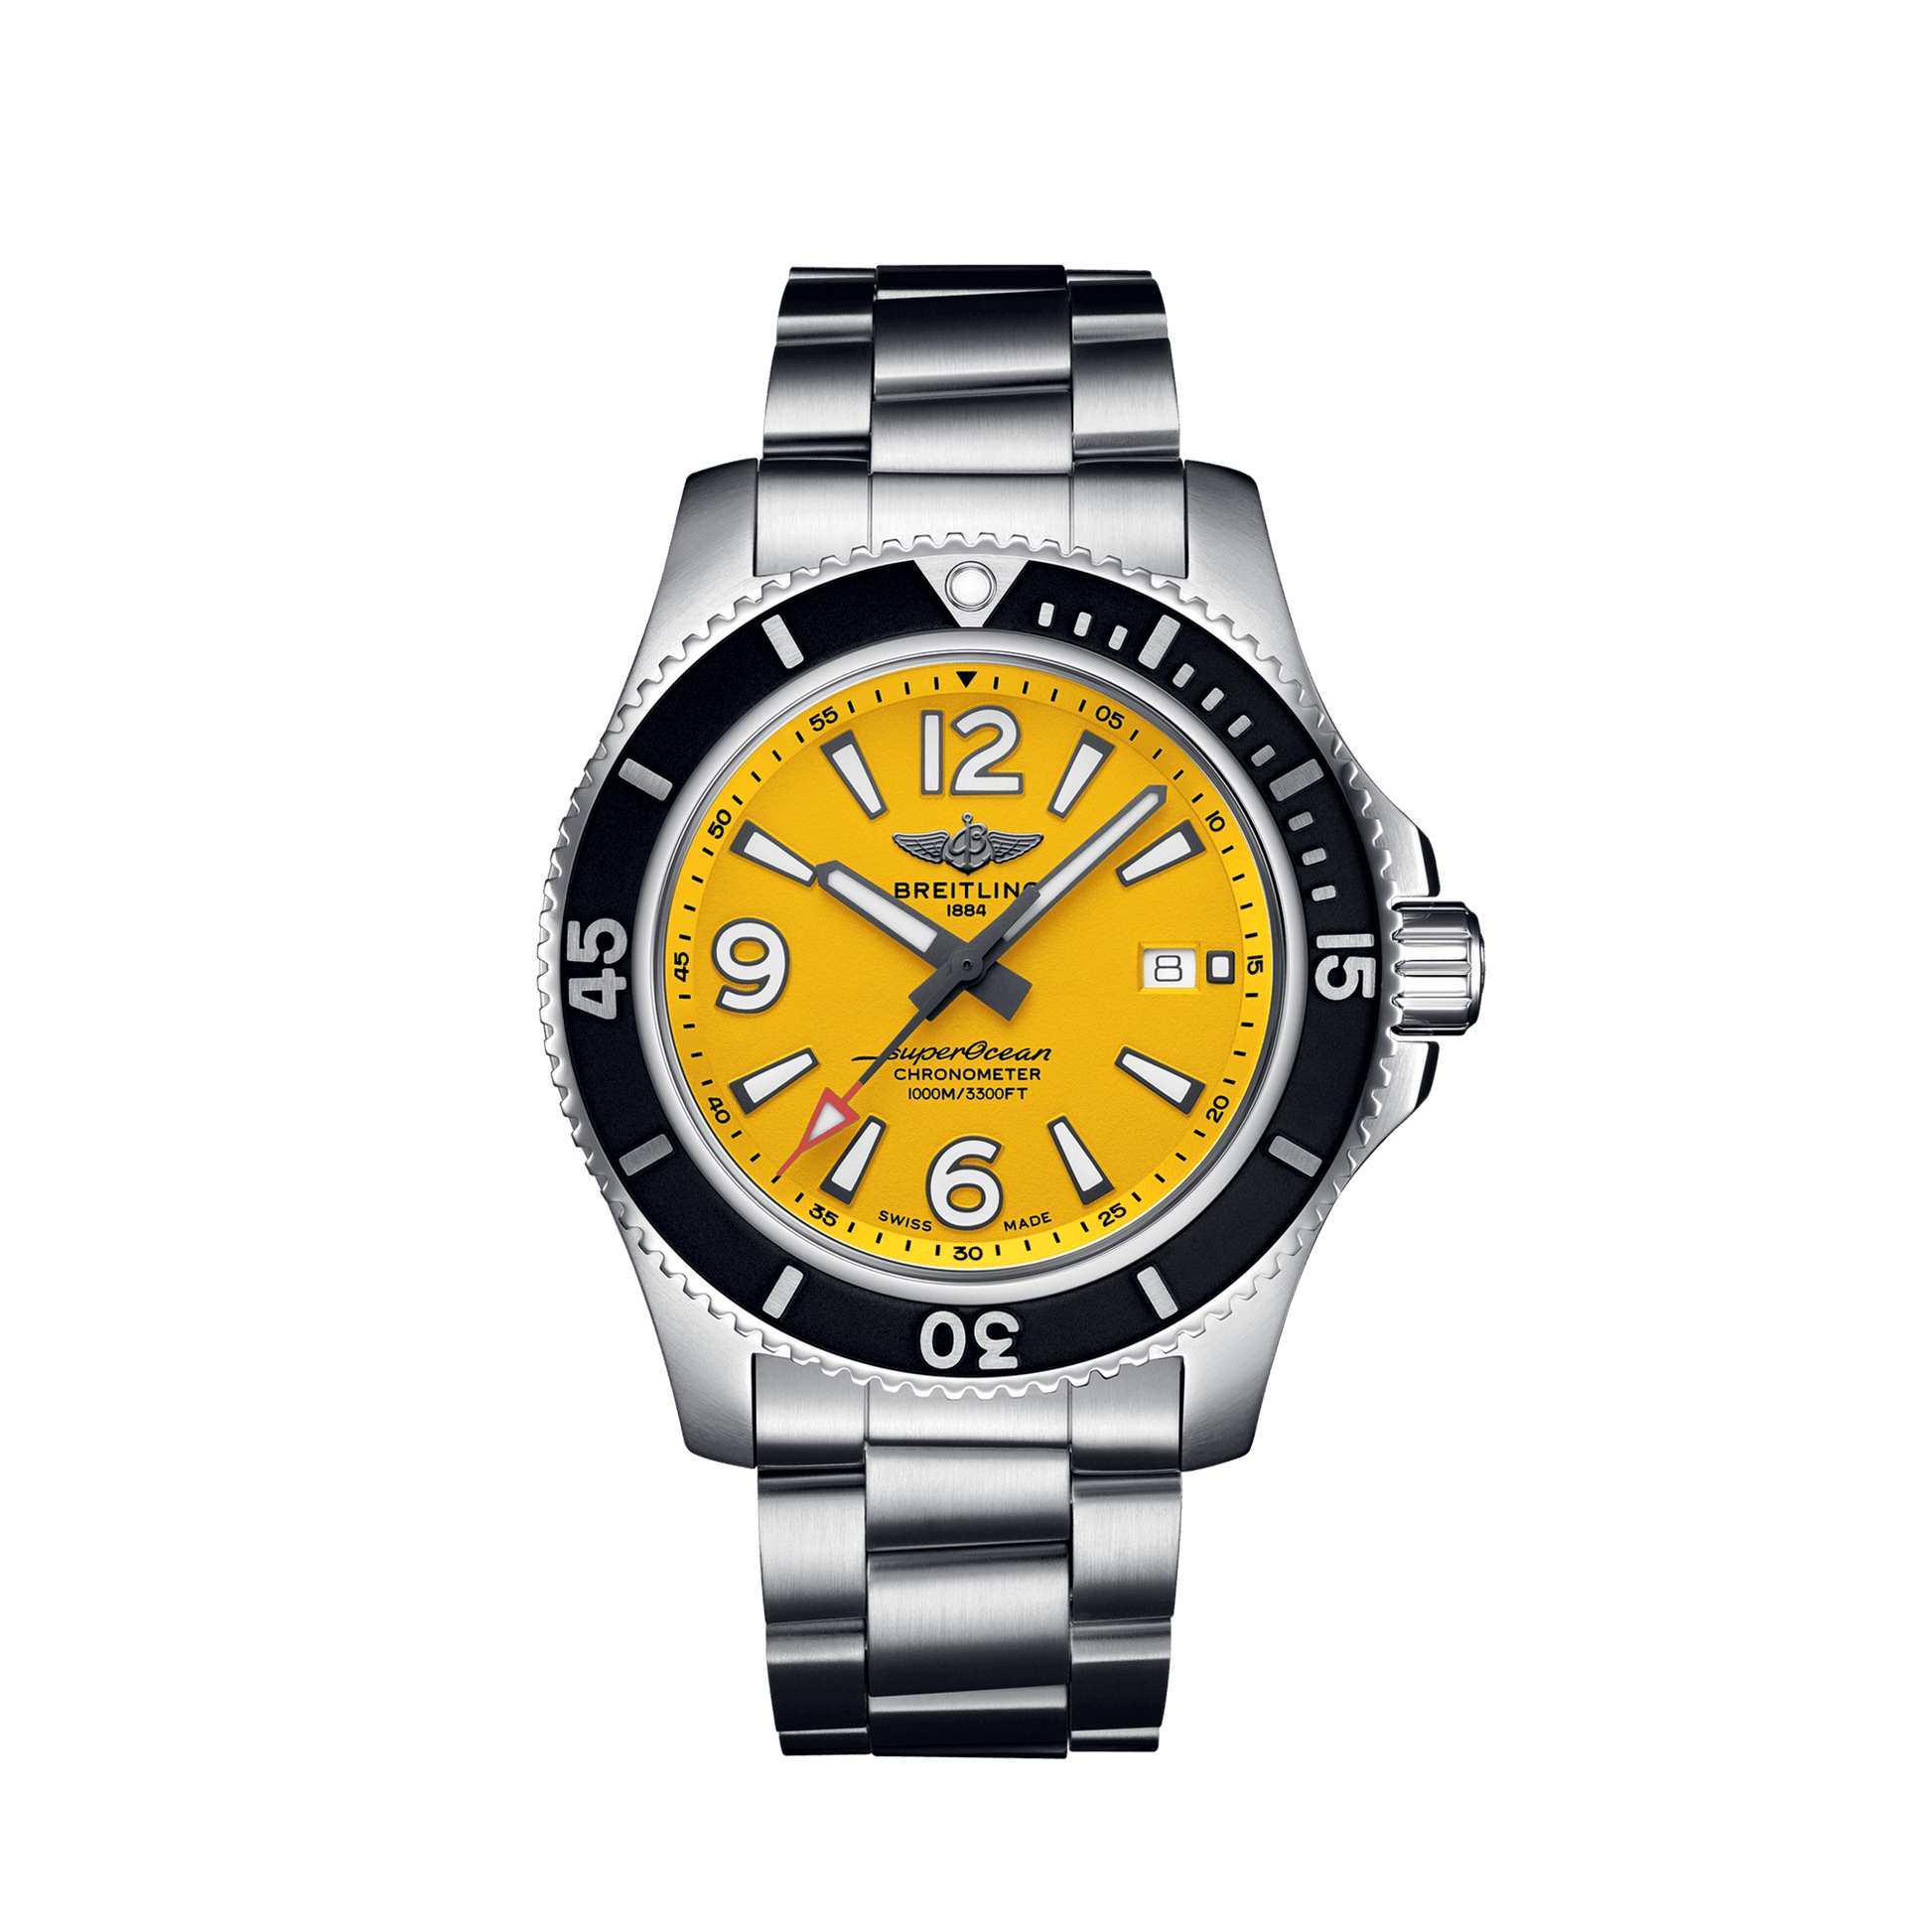 Breitling Superocean Automatic 44mm Yellow Dial Silver Steel Strap Watch for Men - A17375211/1A1